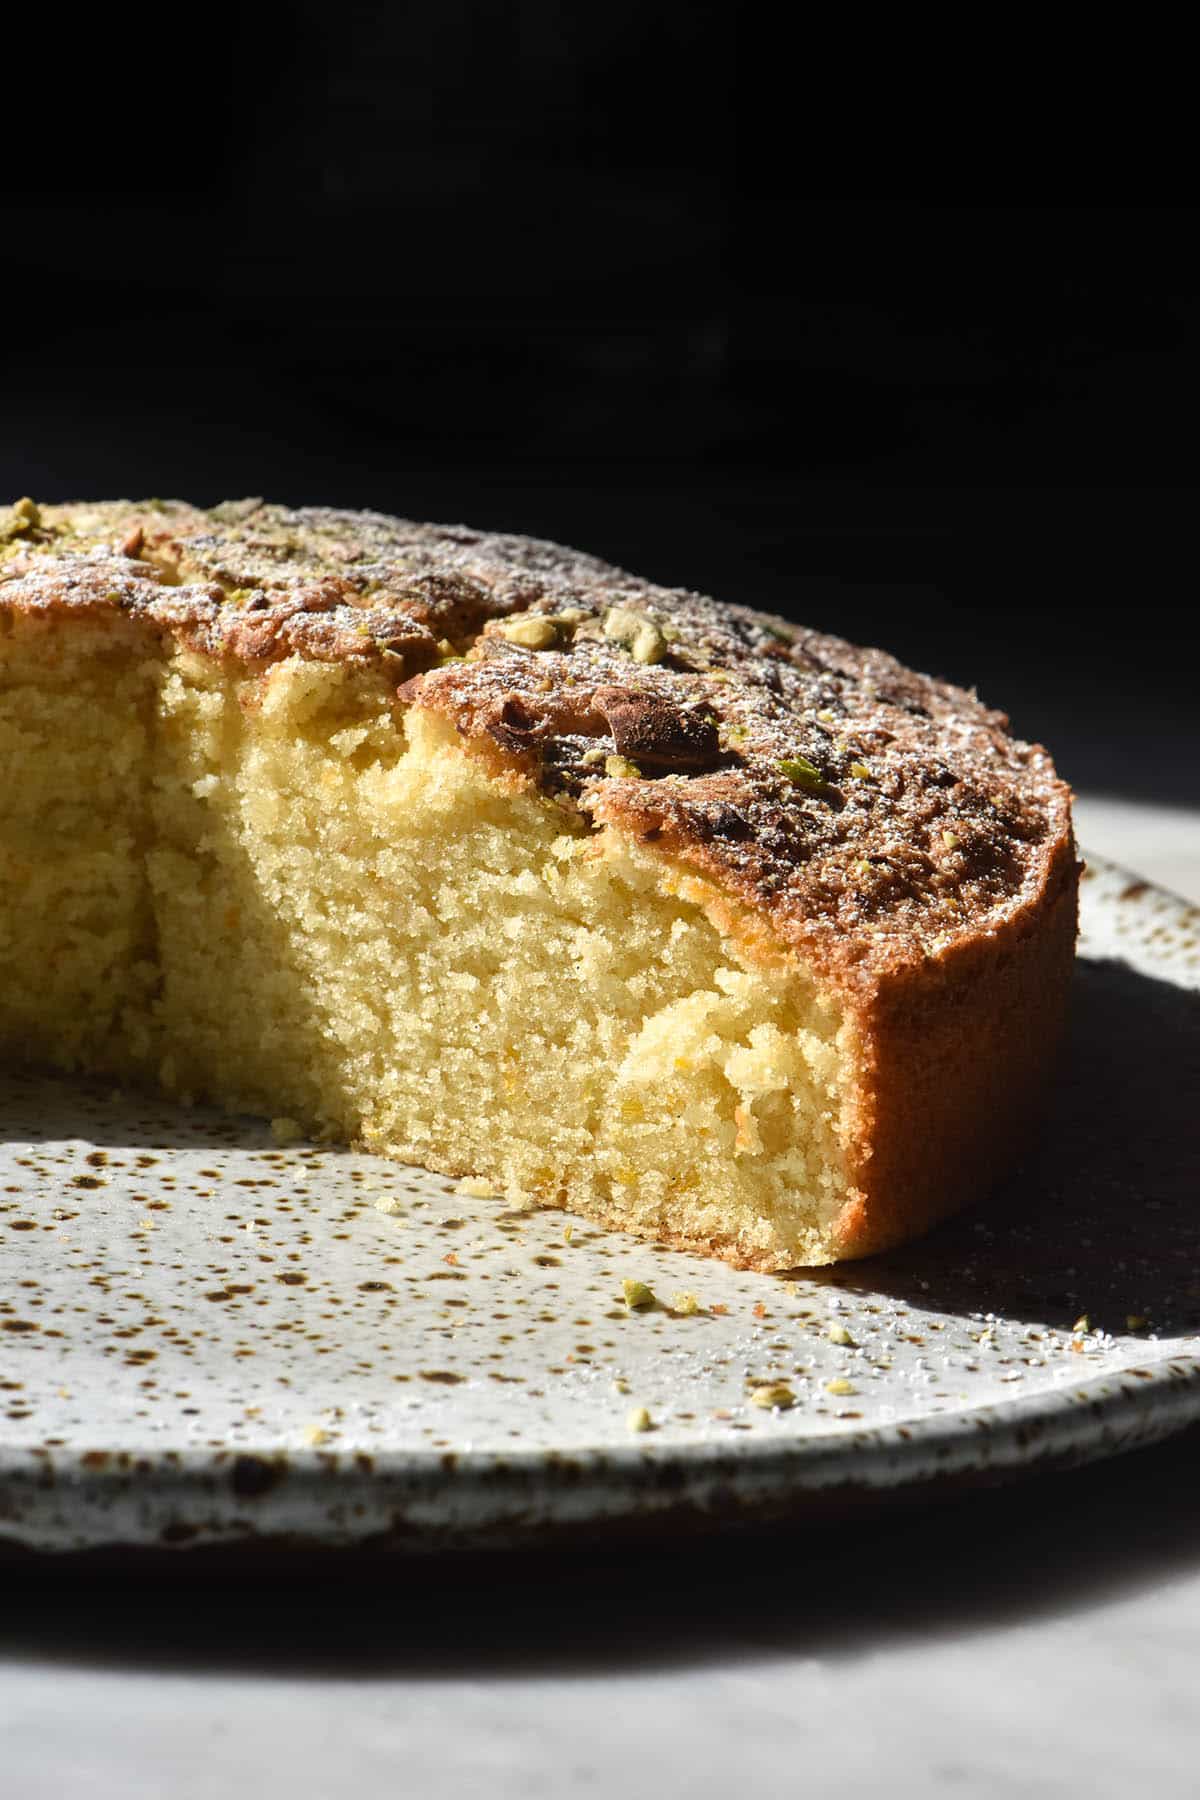 A side on image of a gluten free dairy free lemon olive oil cake in contrasting light against a black backdrop